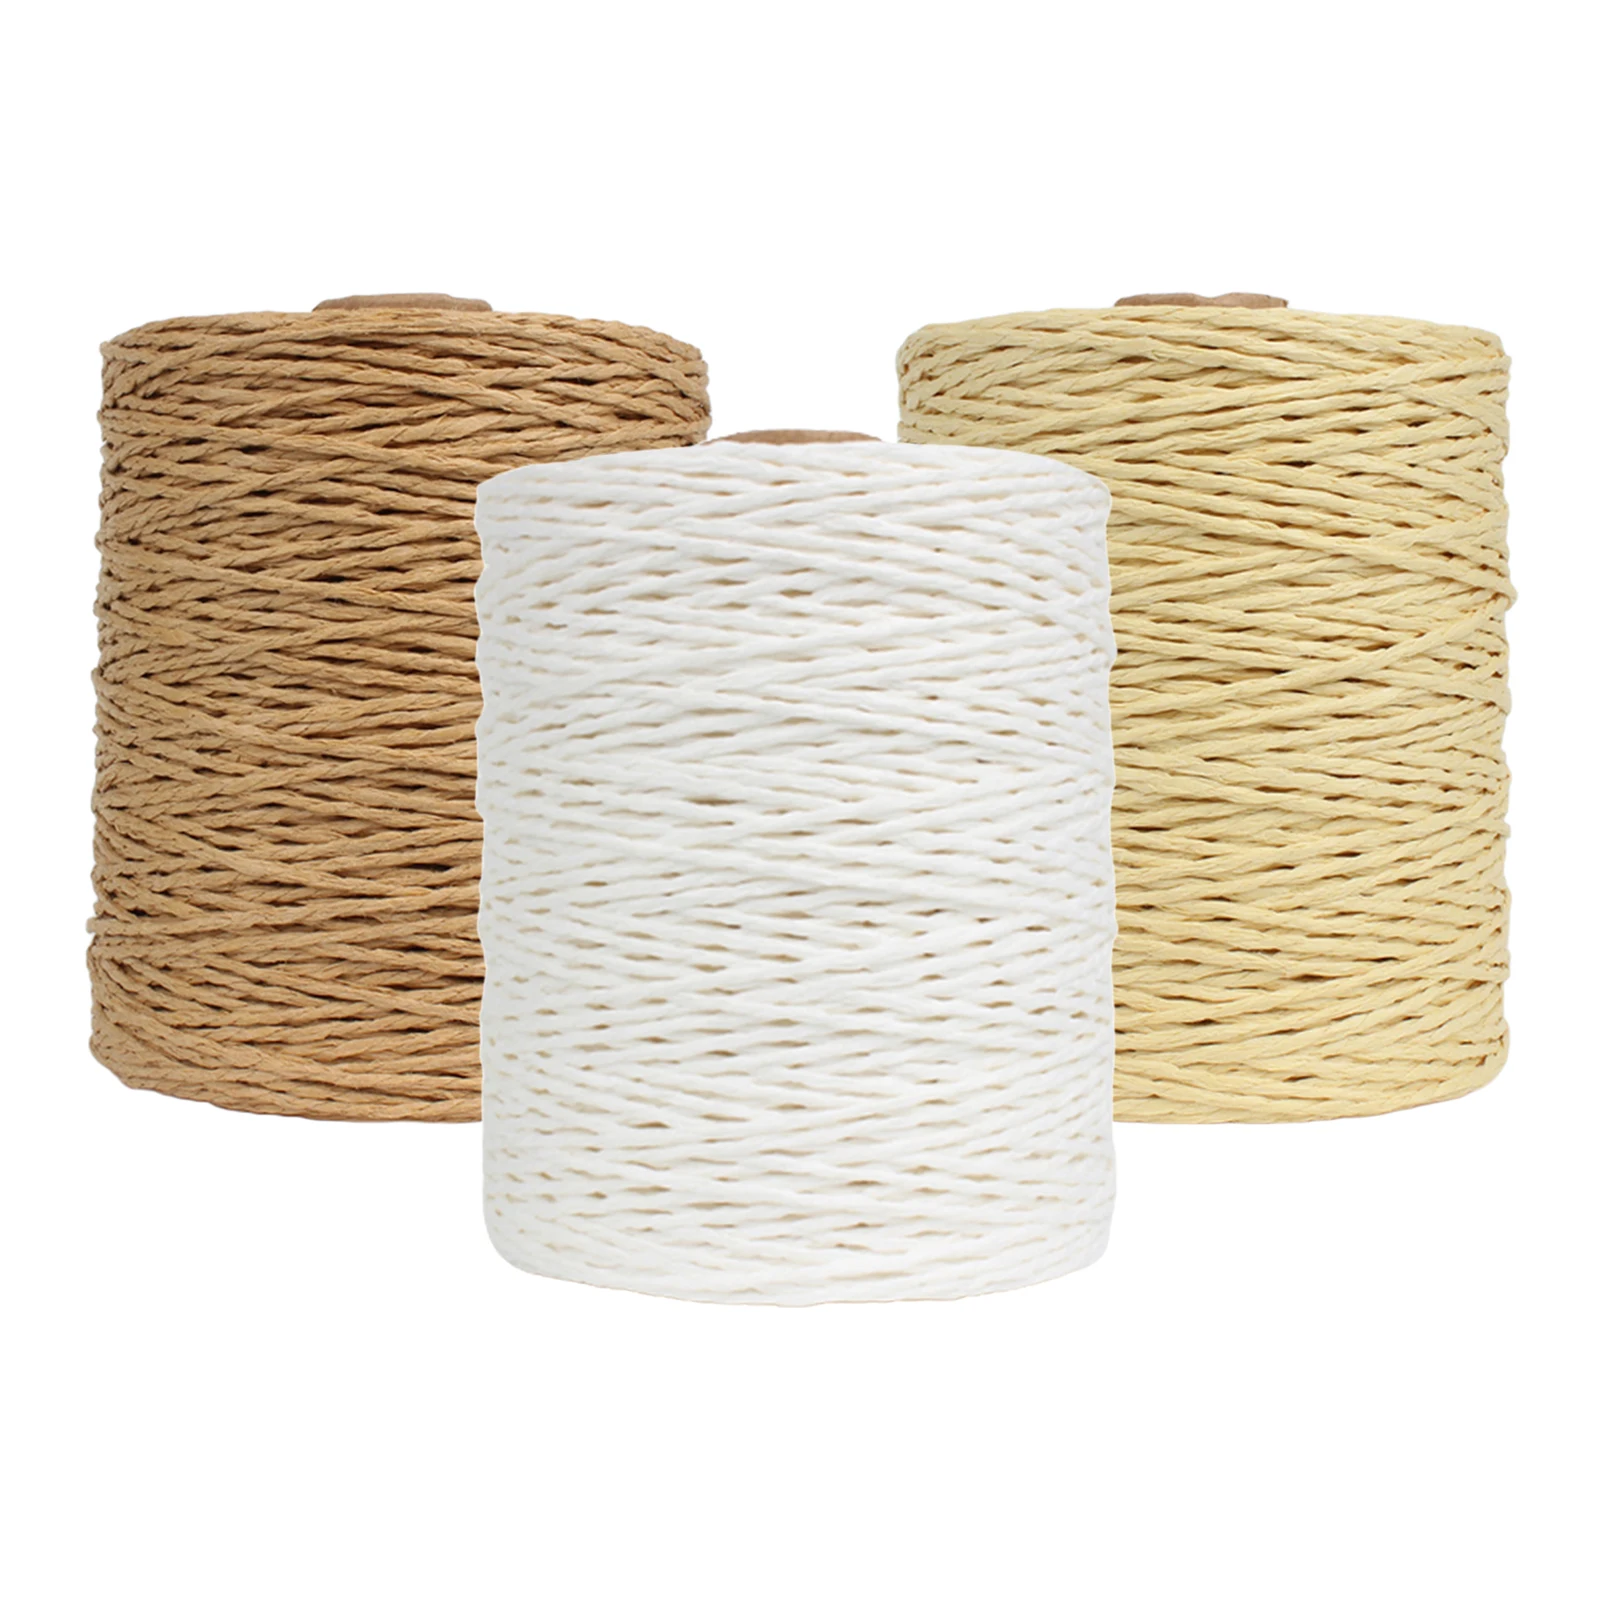 Raffia Paper Yarn Roll Natural Eco-friendly Twine String Gift Wrapping Bouquets Decoration Weaving Thread